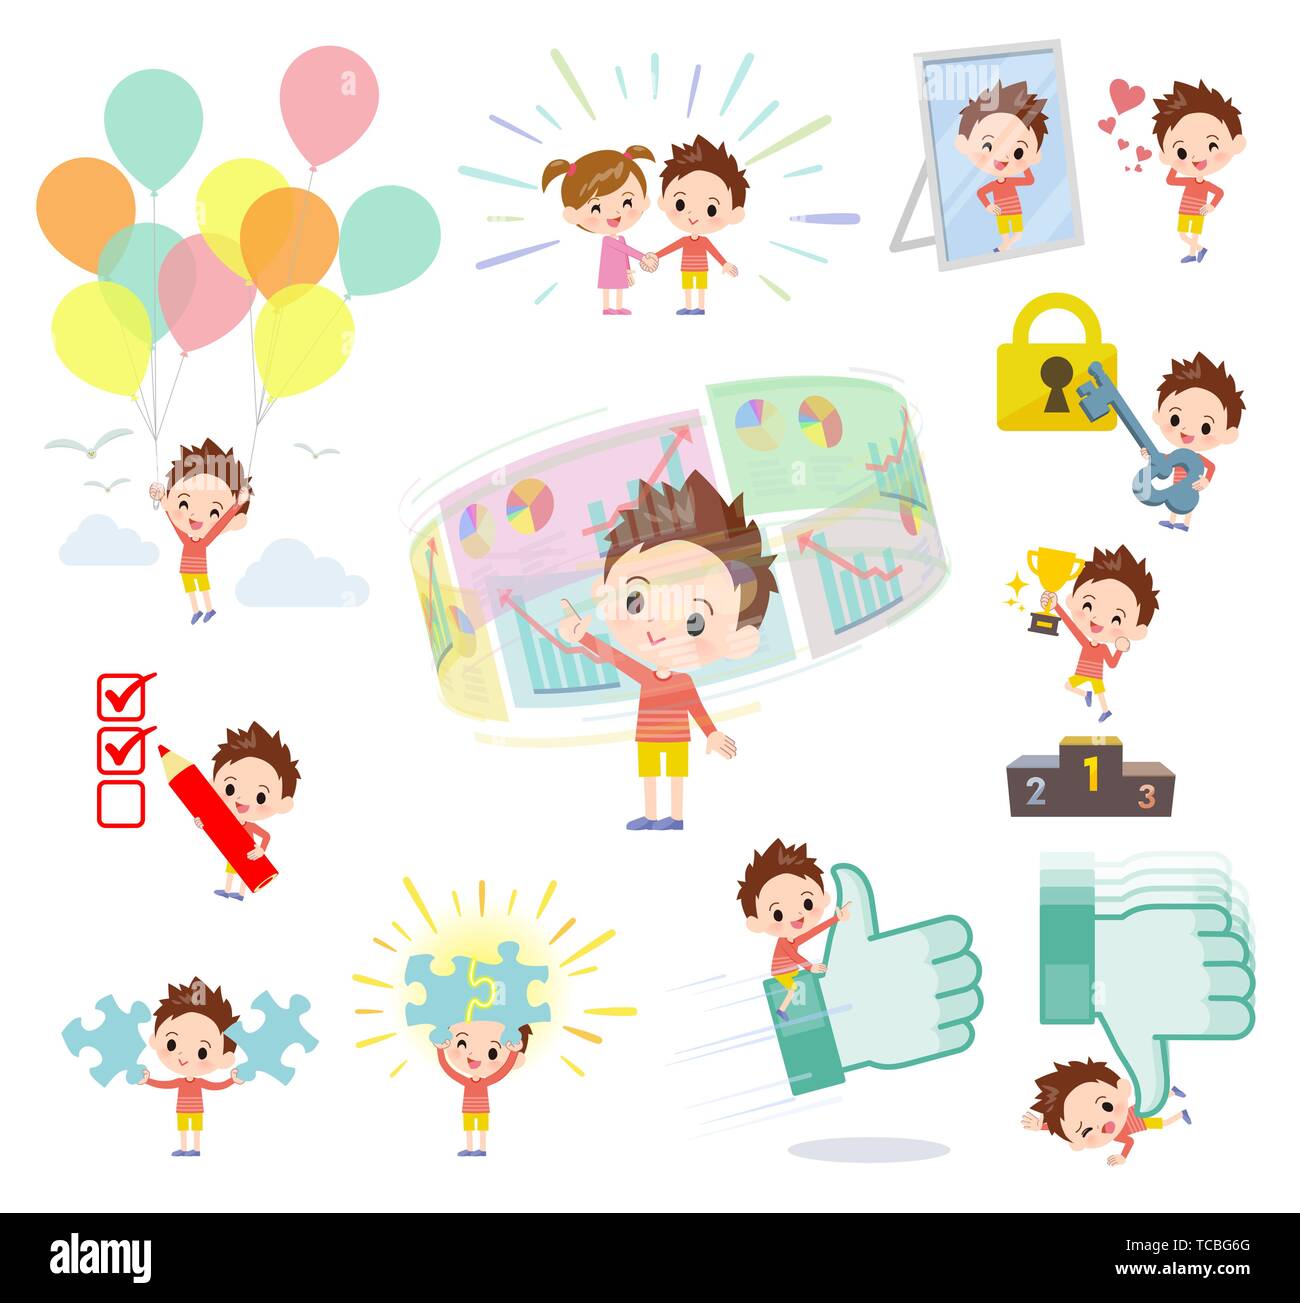 A set of boy on success and positive.There are actions on business and solution as well.It's vector art so it's easy to edit. Stock Vector